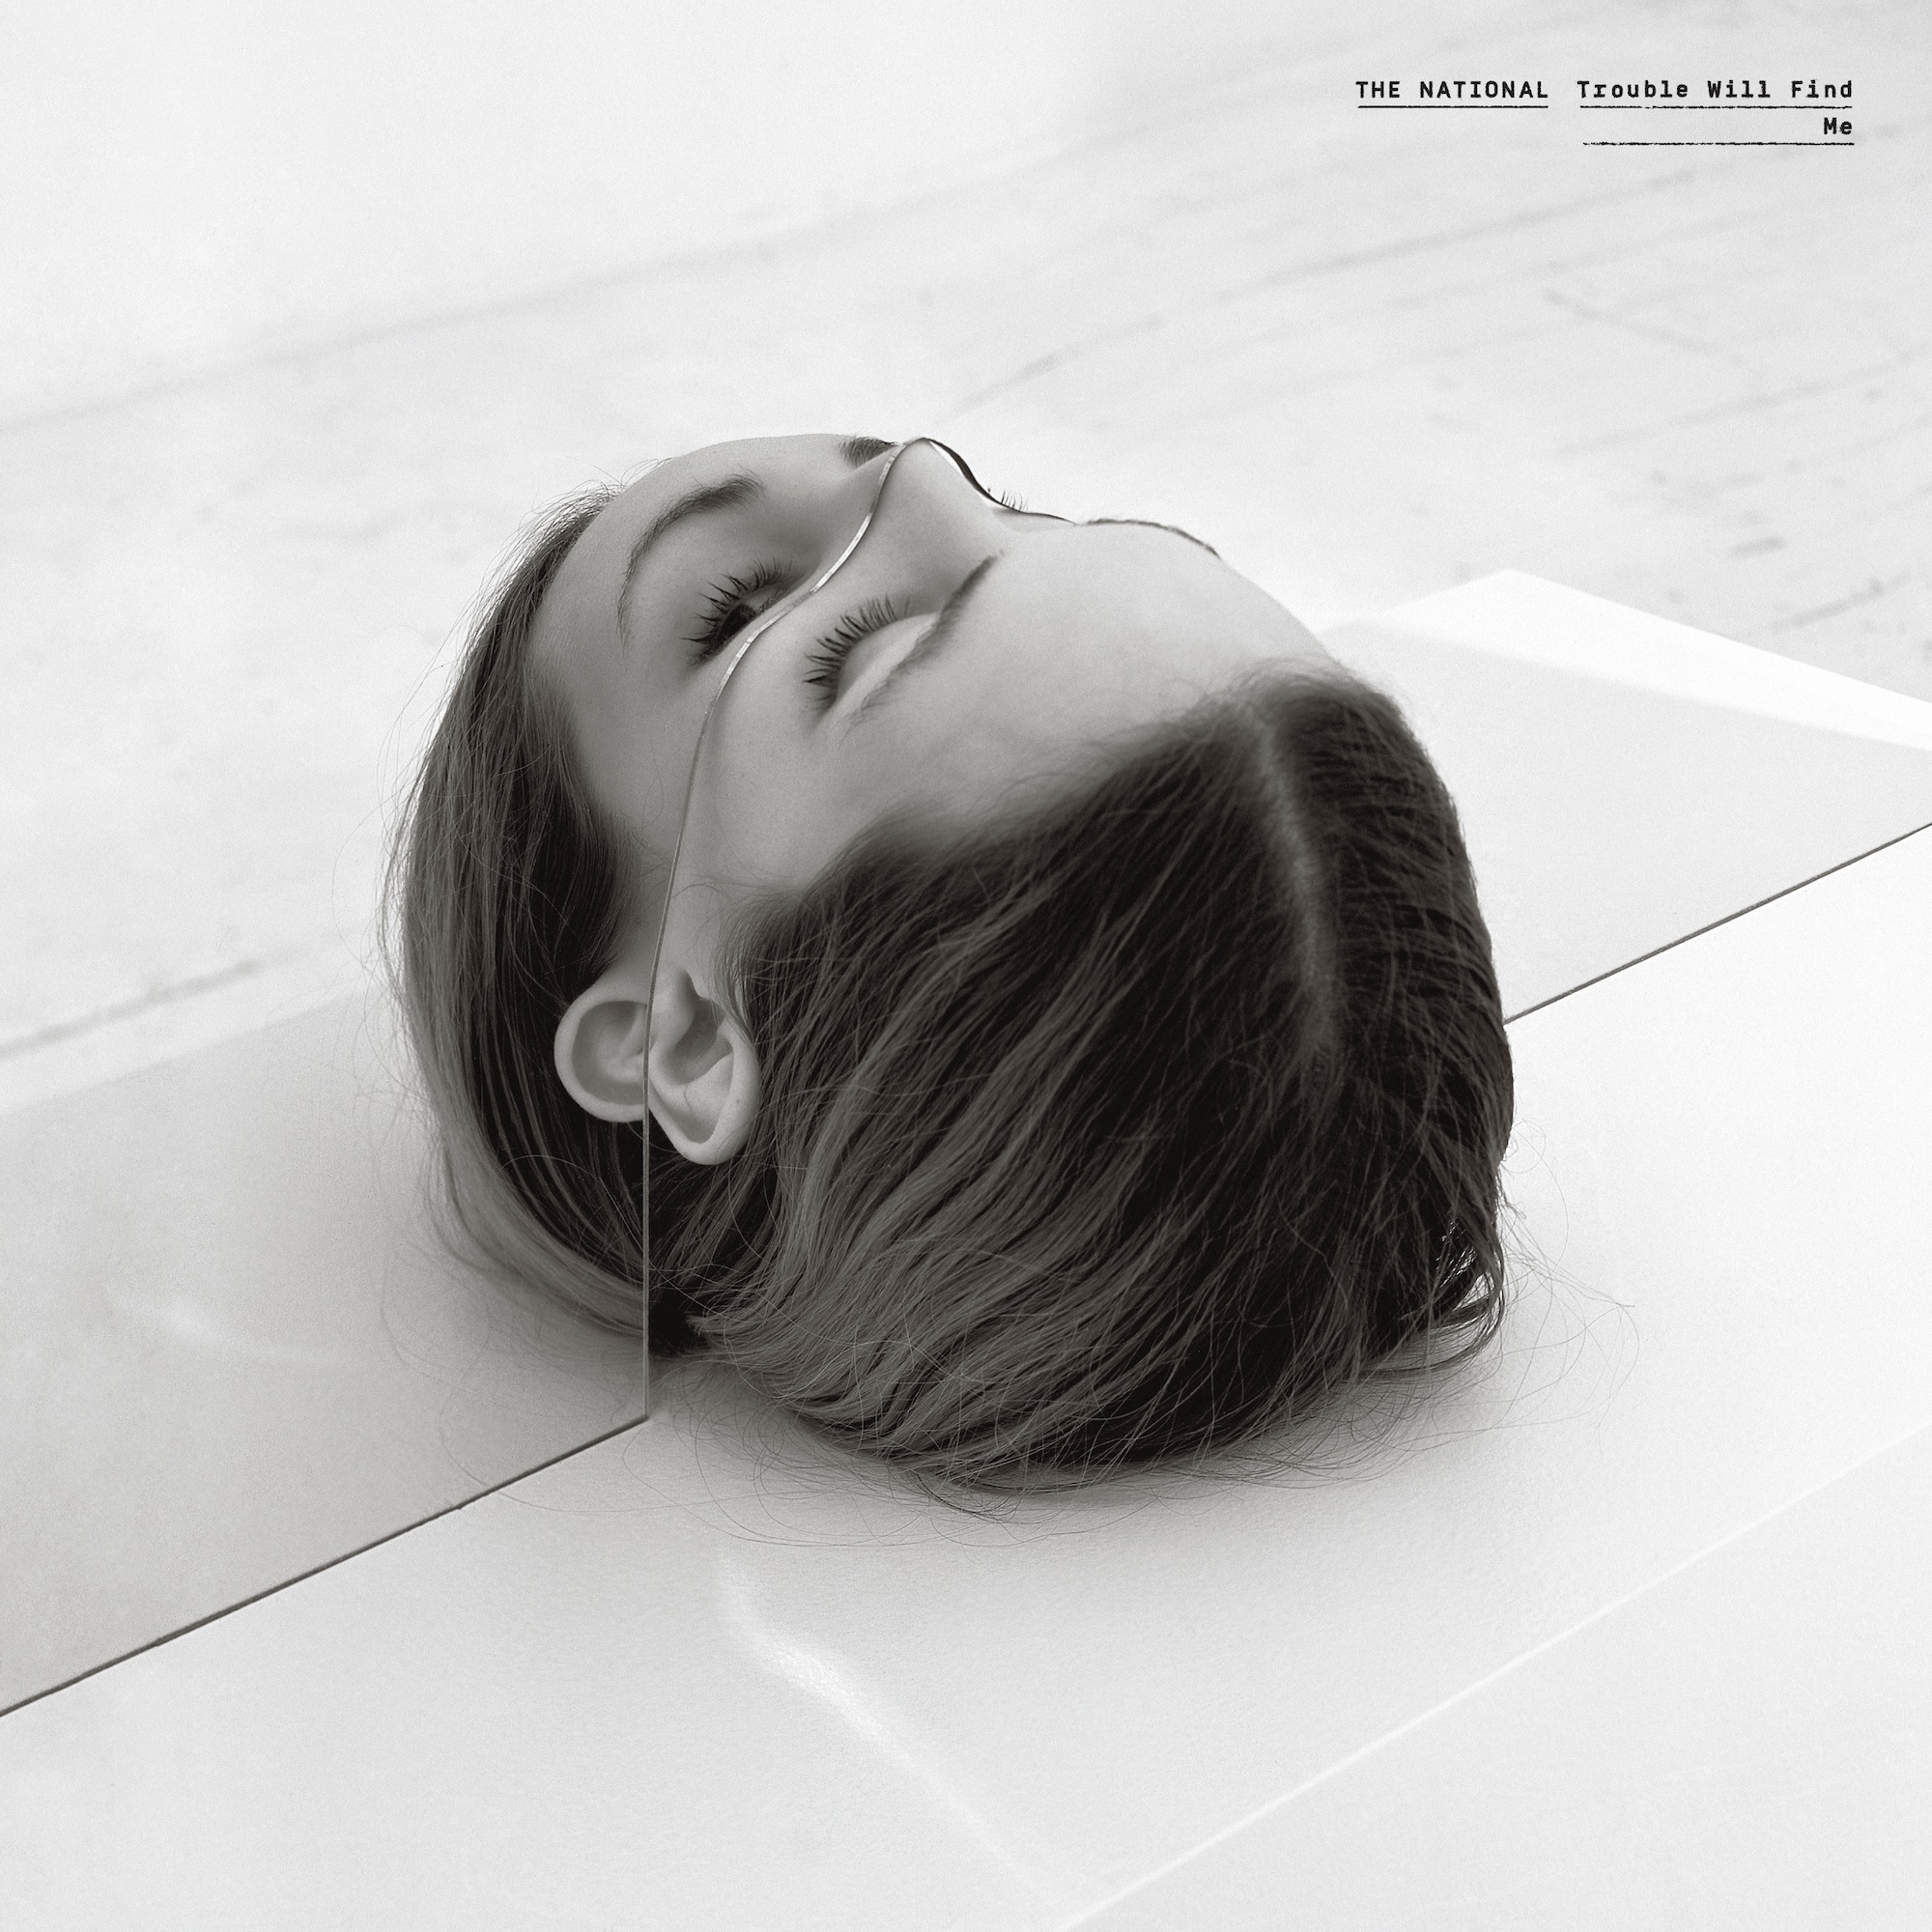 ALBUM REVIEW: THE NATIONAL — “TROUBLE WILL FIND ME”